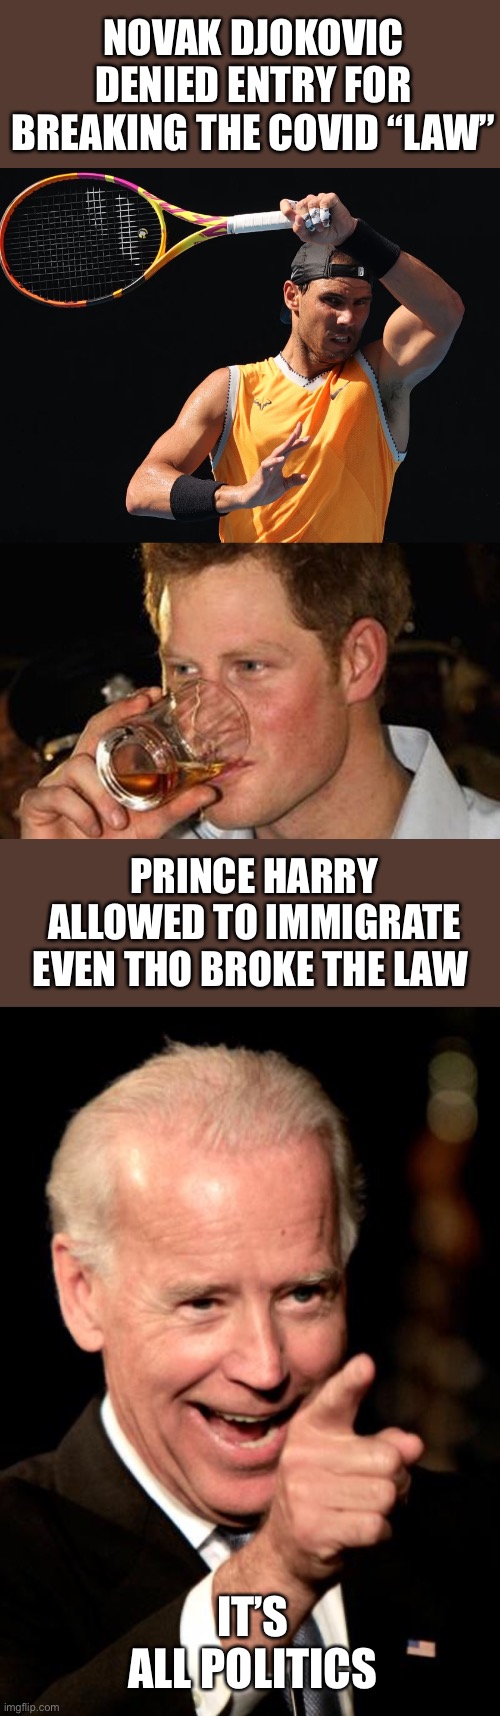 Tyrannical regimes punish those who go against the agenda and reward those who promote it. | NOVAK DJOKOVIC DENIED ENTRY FOR BREAKING THE COVID “LAW”; PRINCE HARRY ALLOWED TO IMMIGRATE EVEN THO BROKE THE LAW; IT’S ALL POLITICS | image tagged in smilin biden,novak djokovic,prince harry,punish,reward,agenda | made w/ Imgflip meme maker